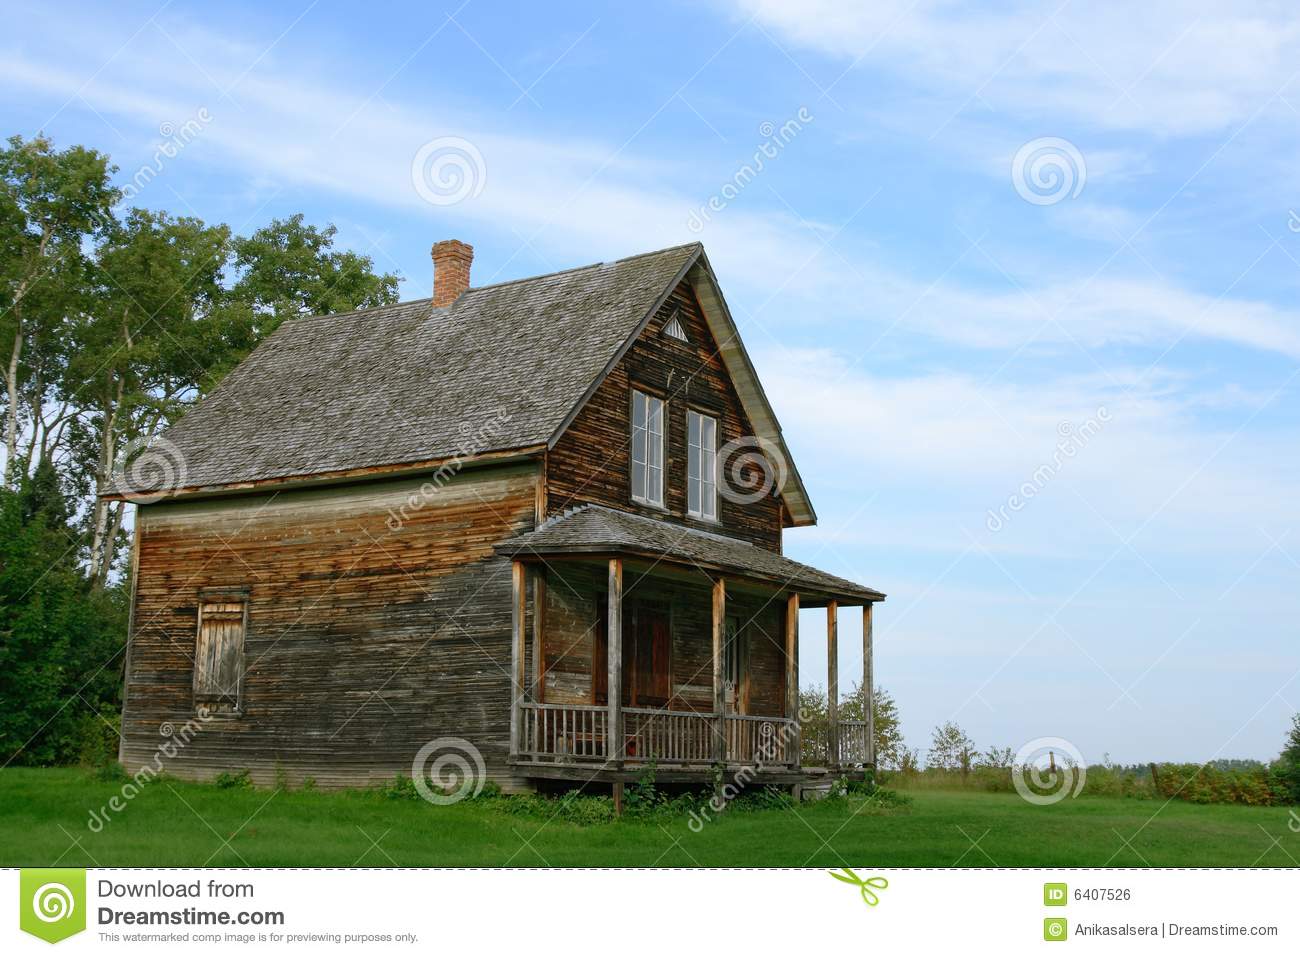 wooden country house plans photo - 8